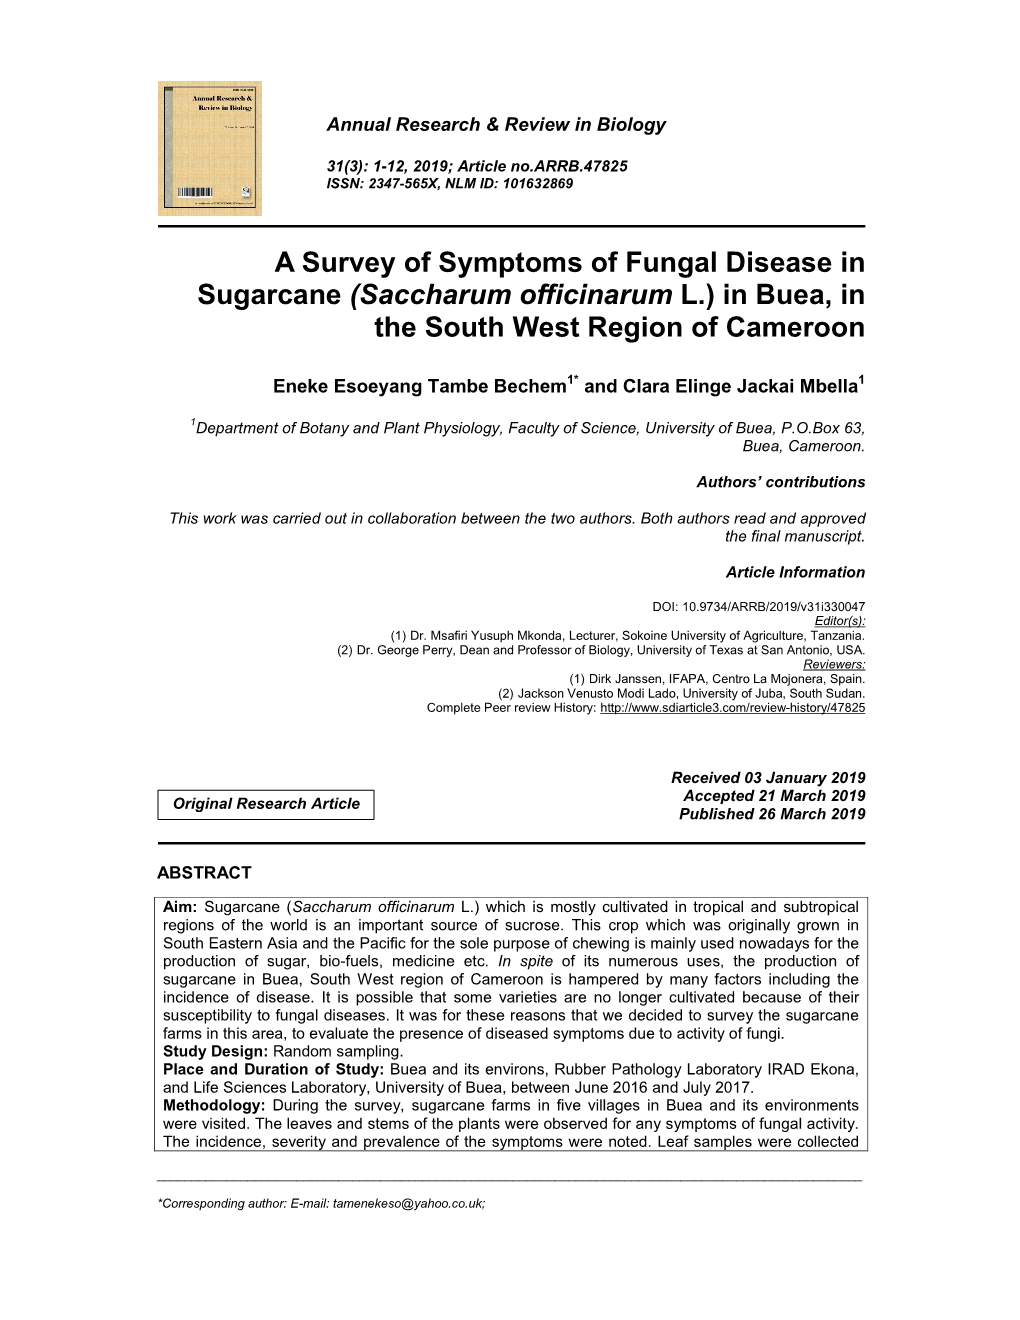 A Survey of Symptoms of Fungal Disease in Sugarcane (Saccharum Officinarum L.) in Buea, in the South West Region of Cameroon